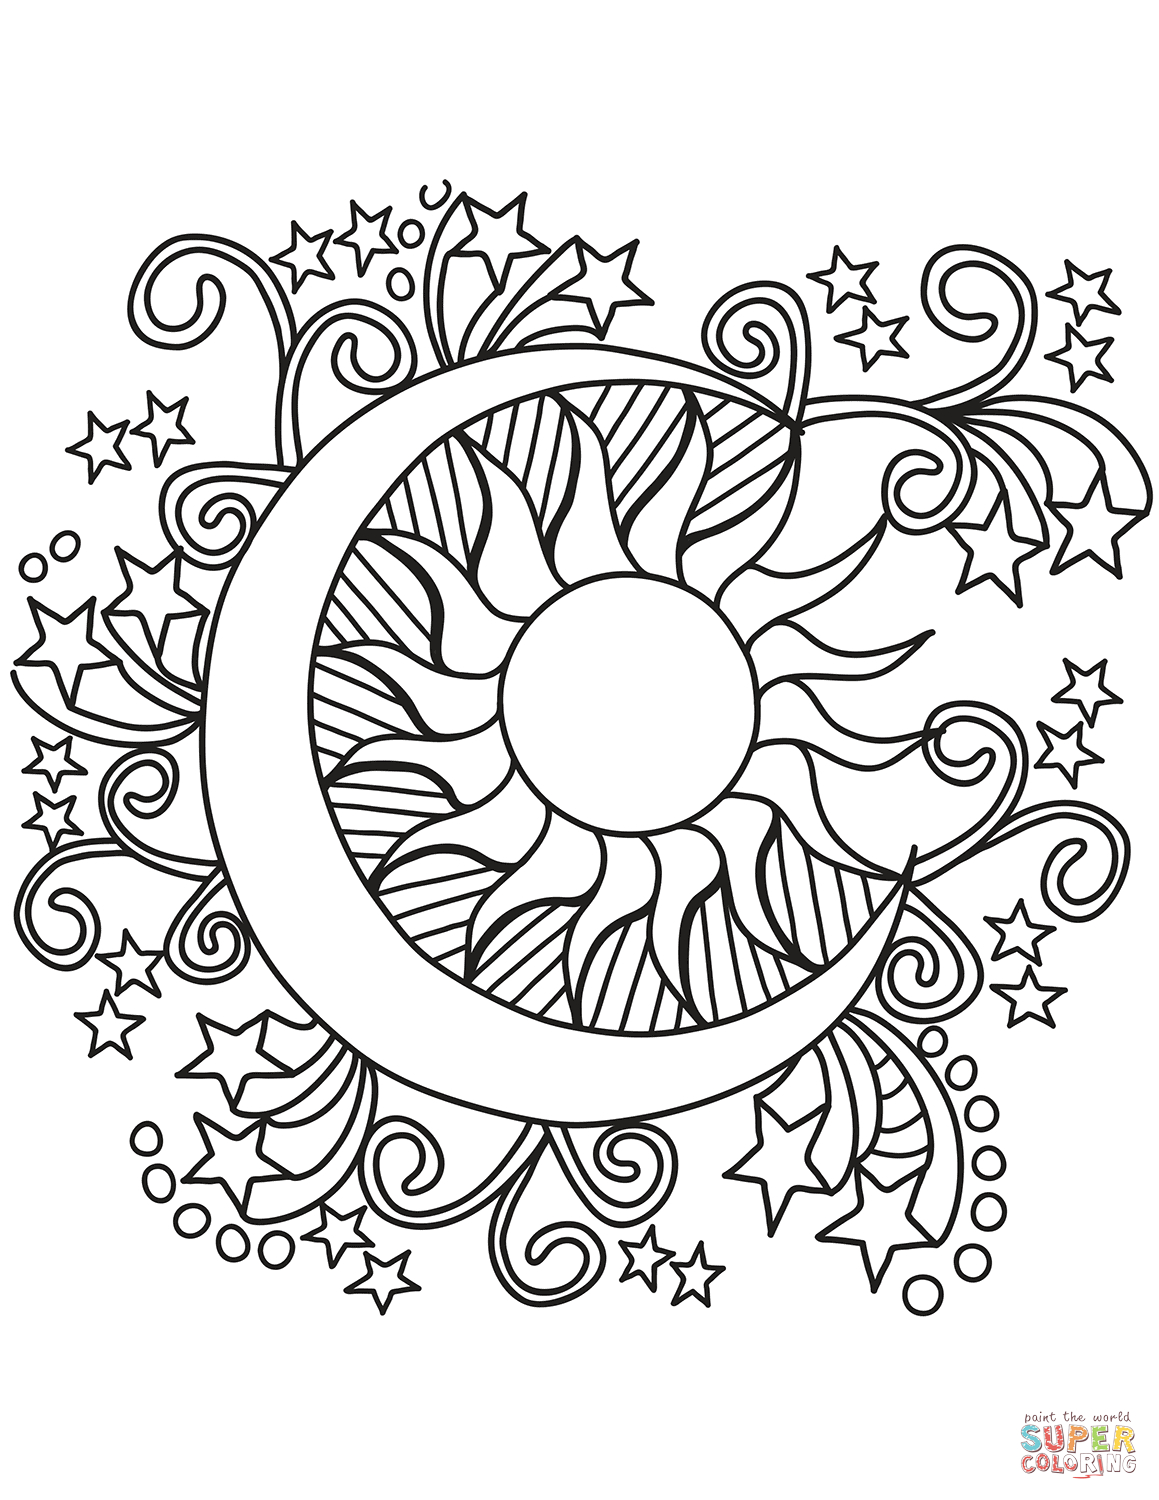 Coloring Pages Sun Pop Art Sun Moon And Stars Coloring Page Free Printable Coloring